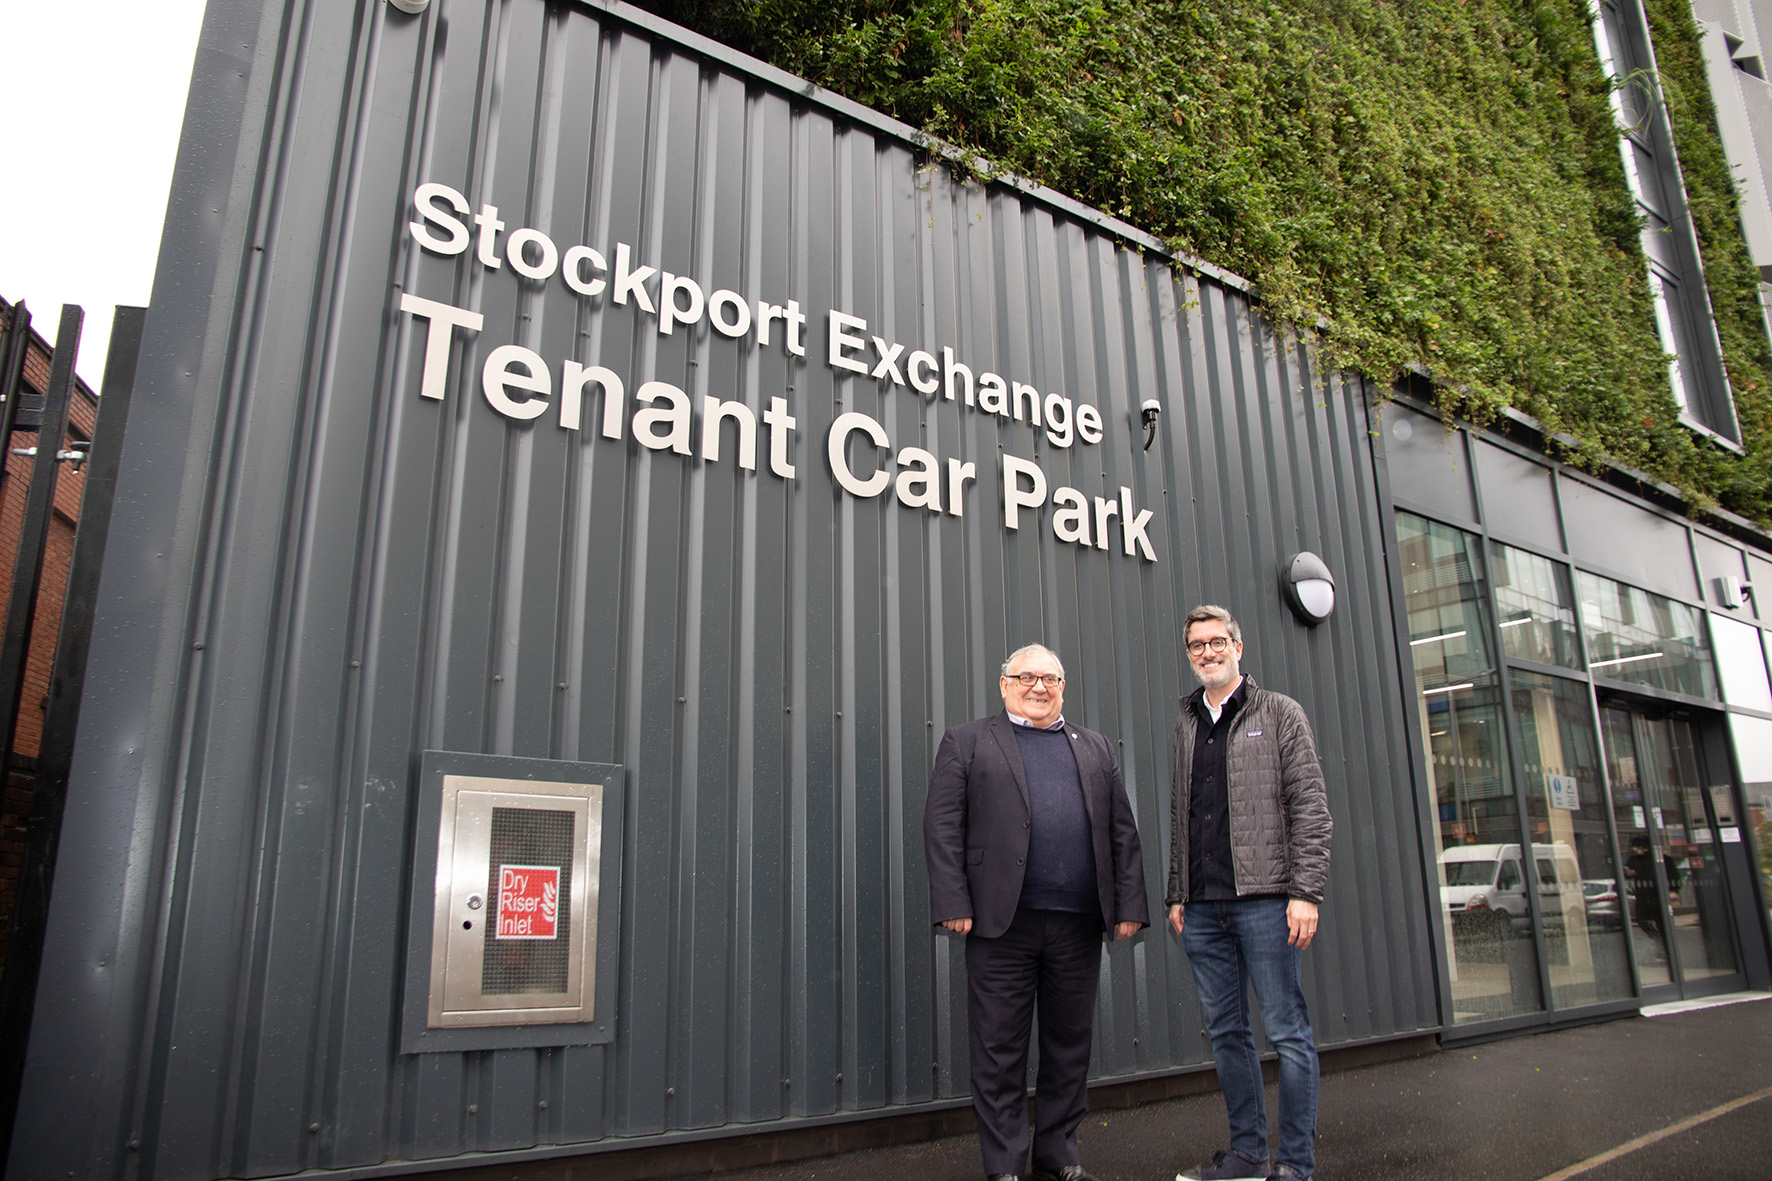 New tenant car park opens at Stockport Exchange